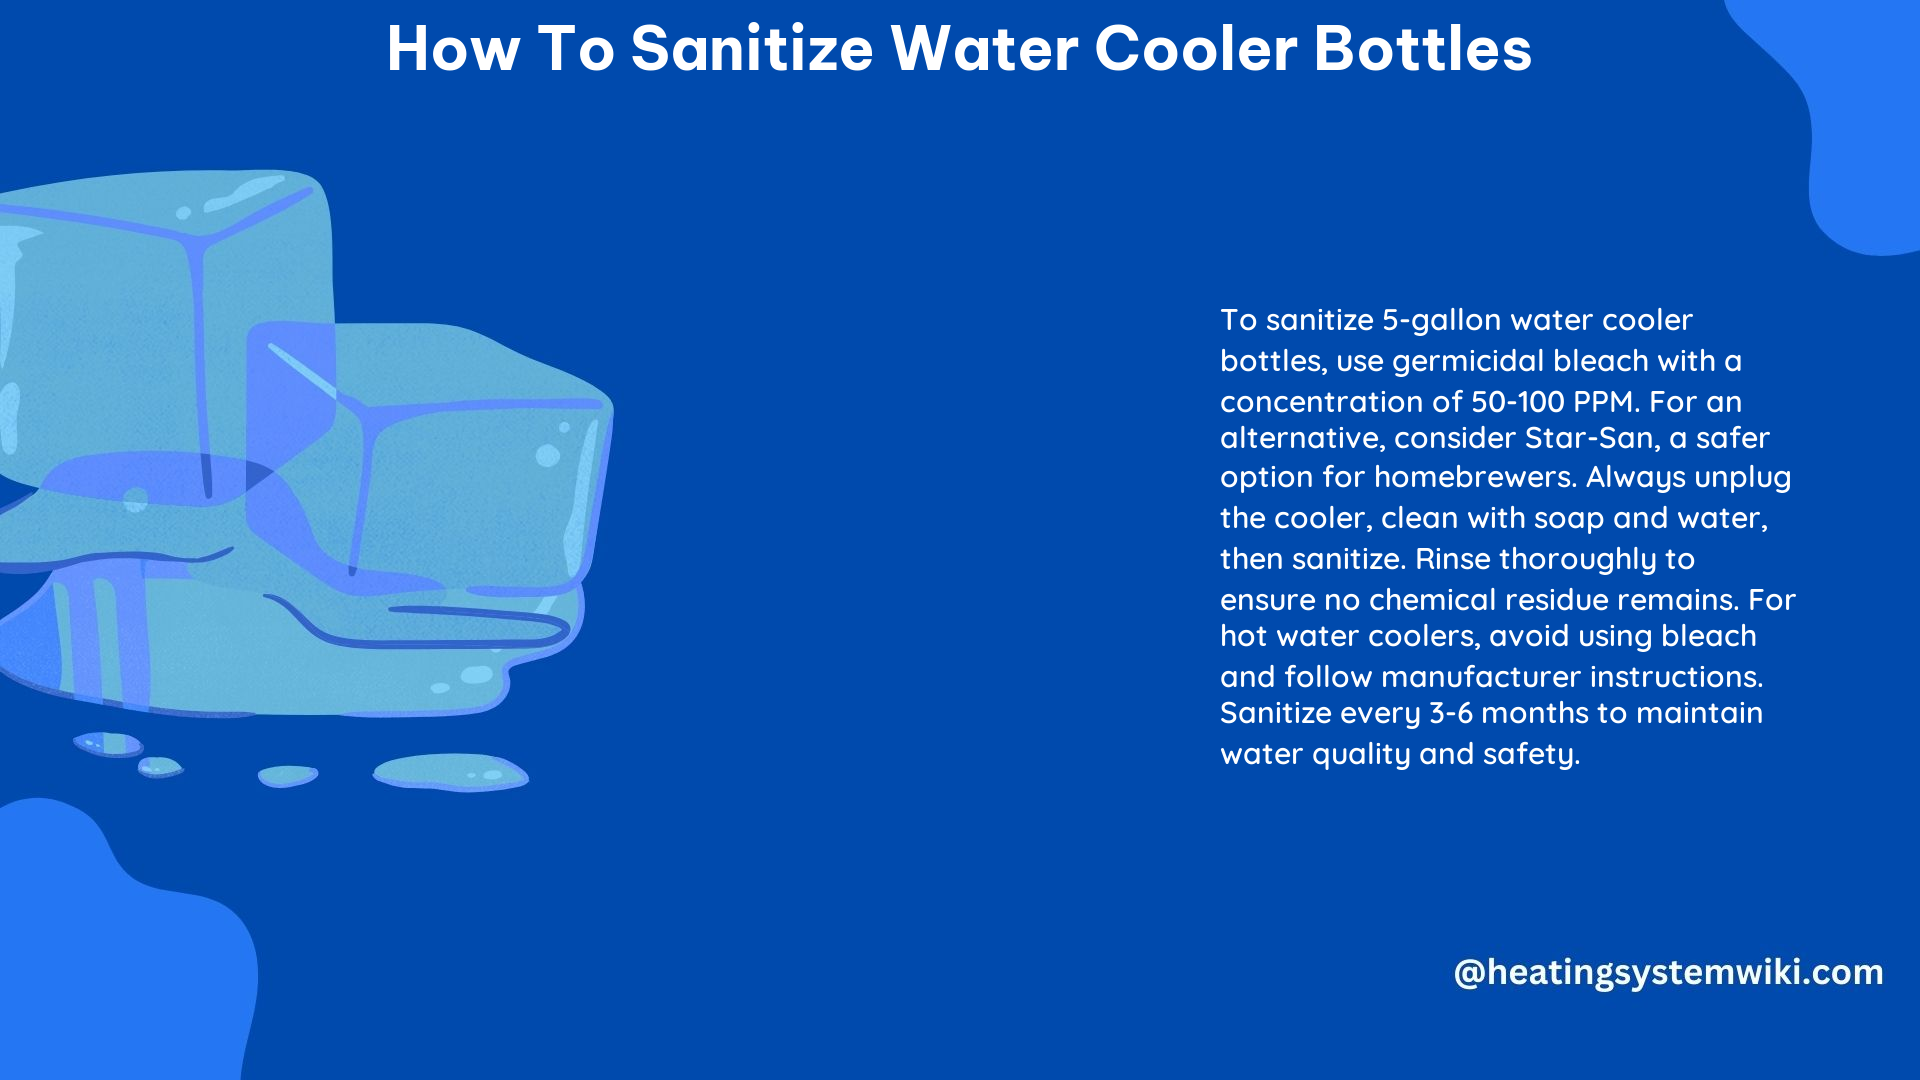 How to Sanitize Water Cooler Bottles